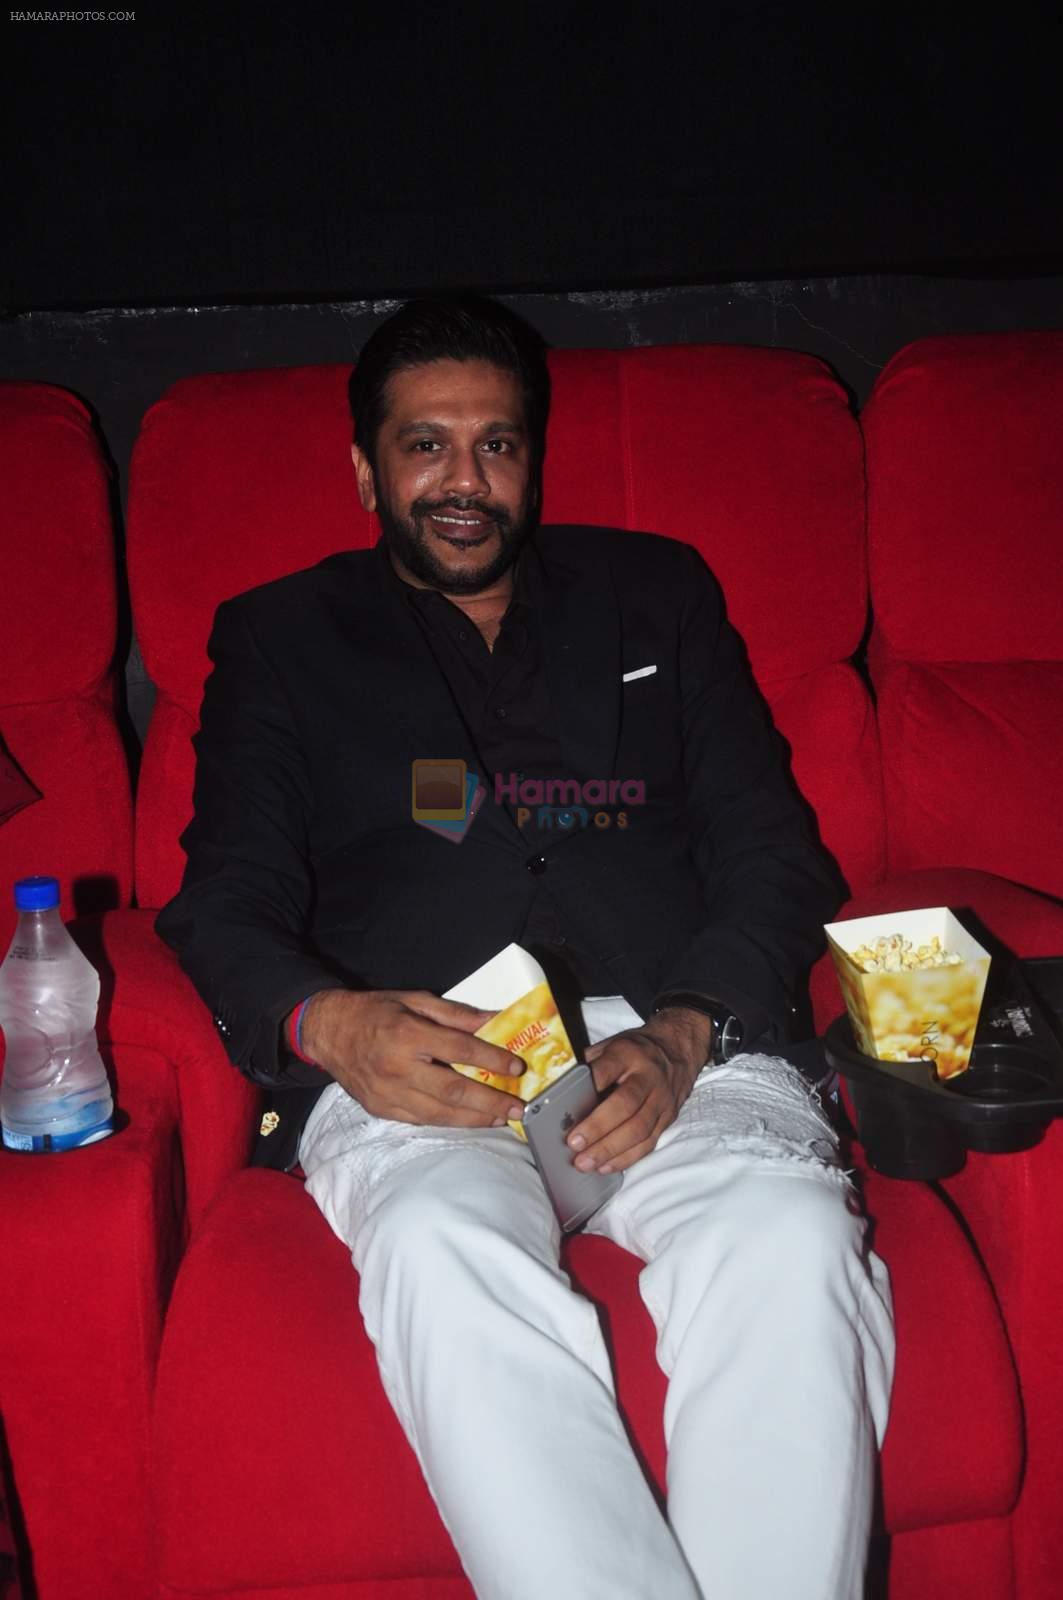 Rocky S at Bhaag jhonny premiere on 24th Sept 2015